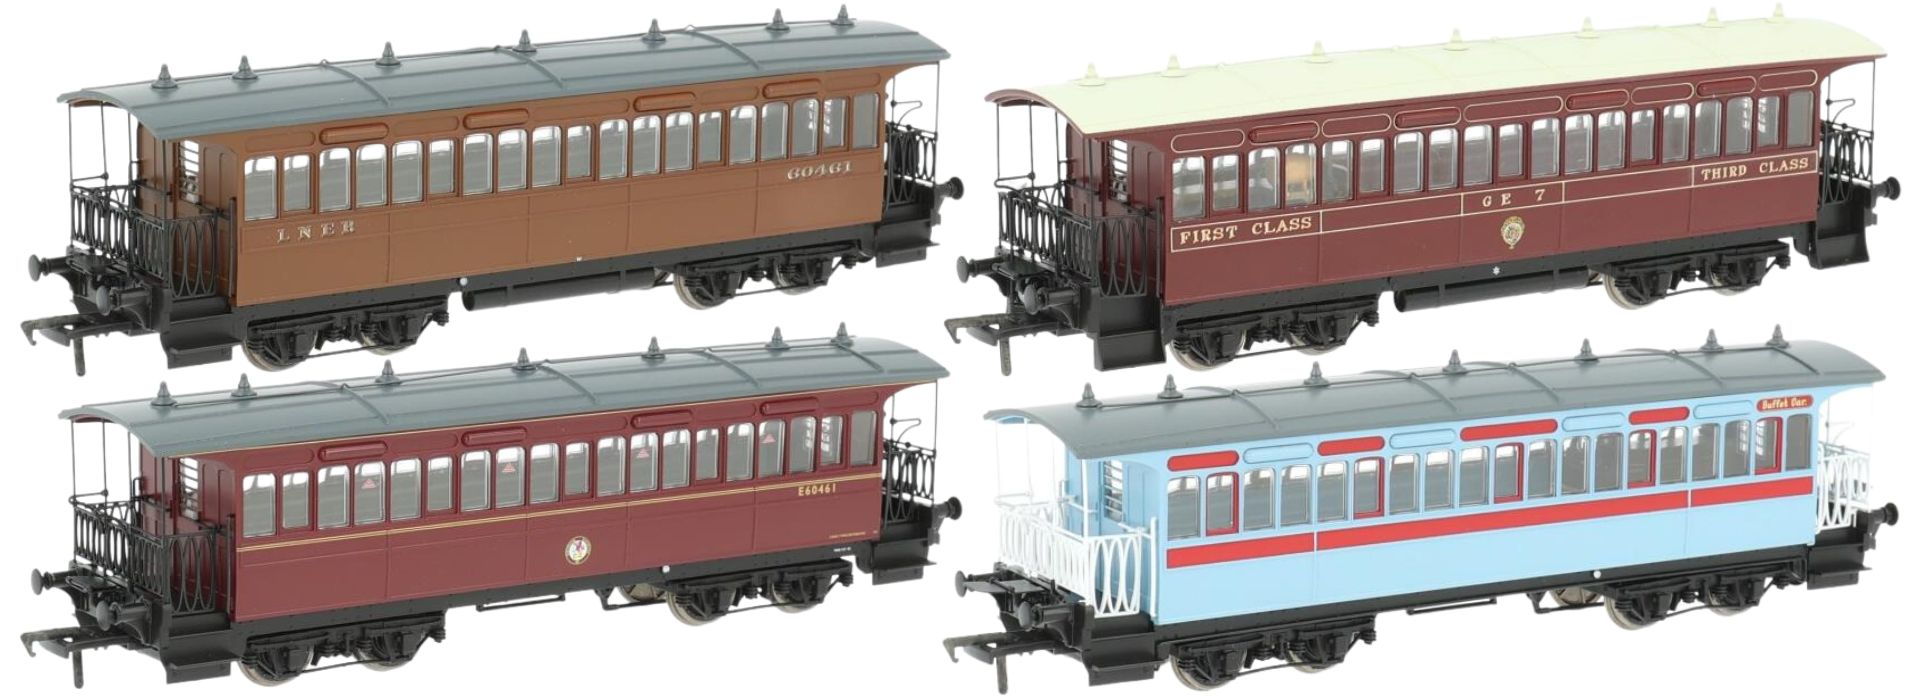 Rapido Trains UK OO Gauge (1:76 Scale) GER Wisbech and Upwell Tramcar